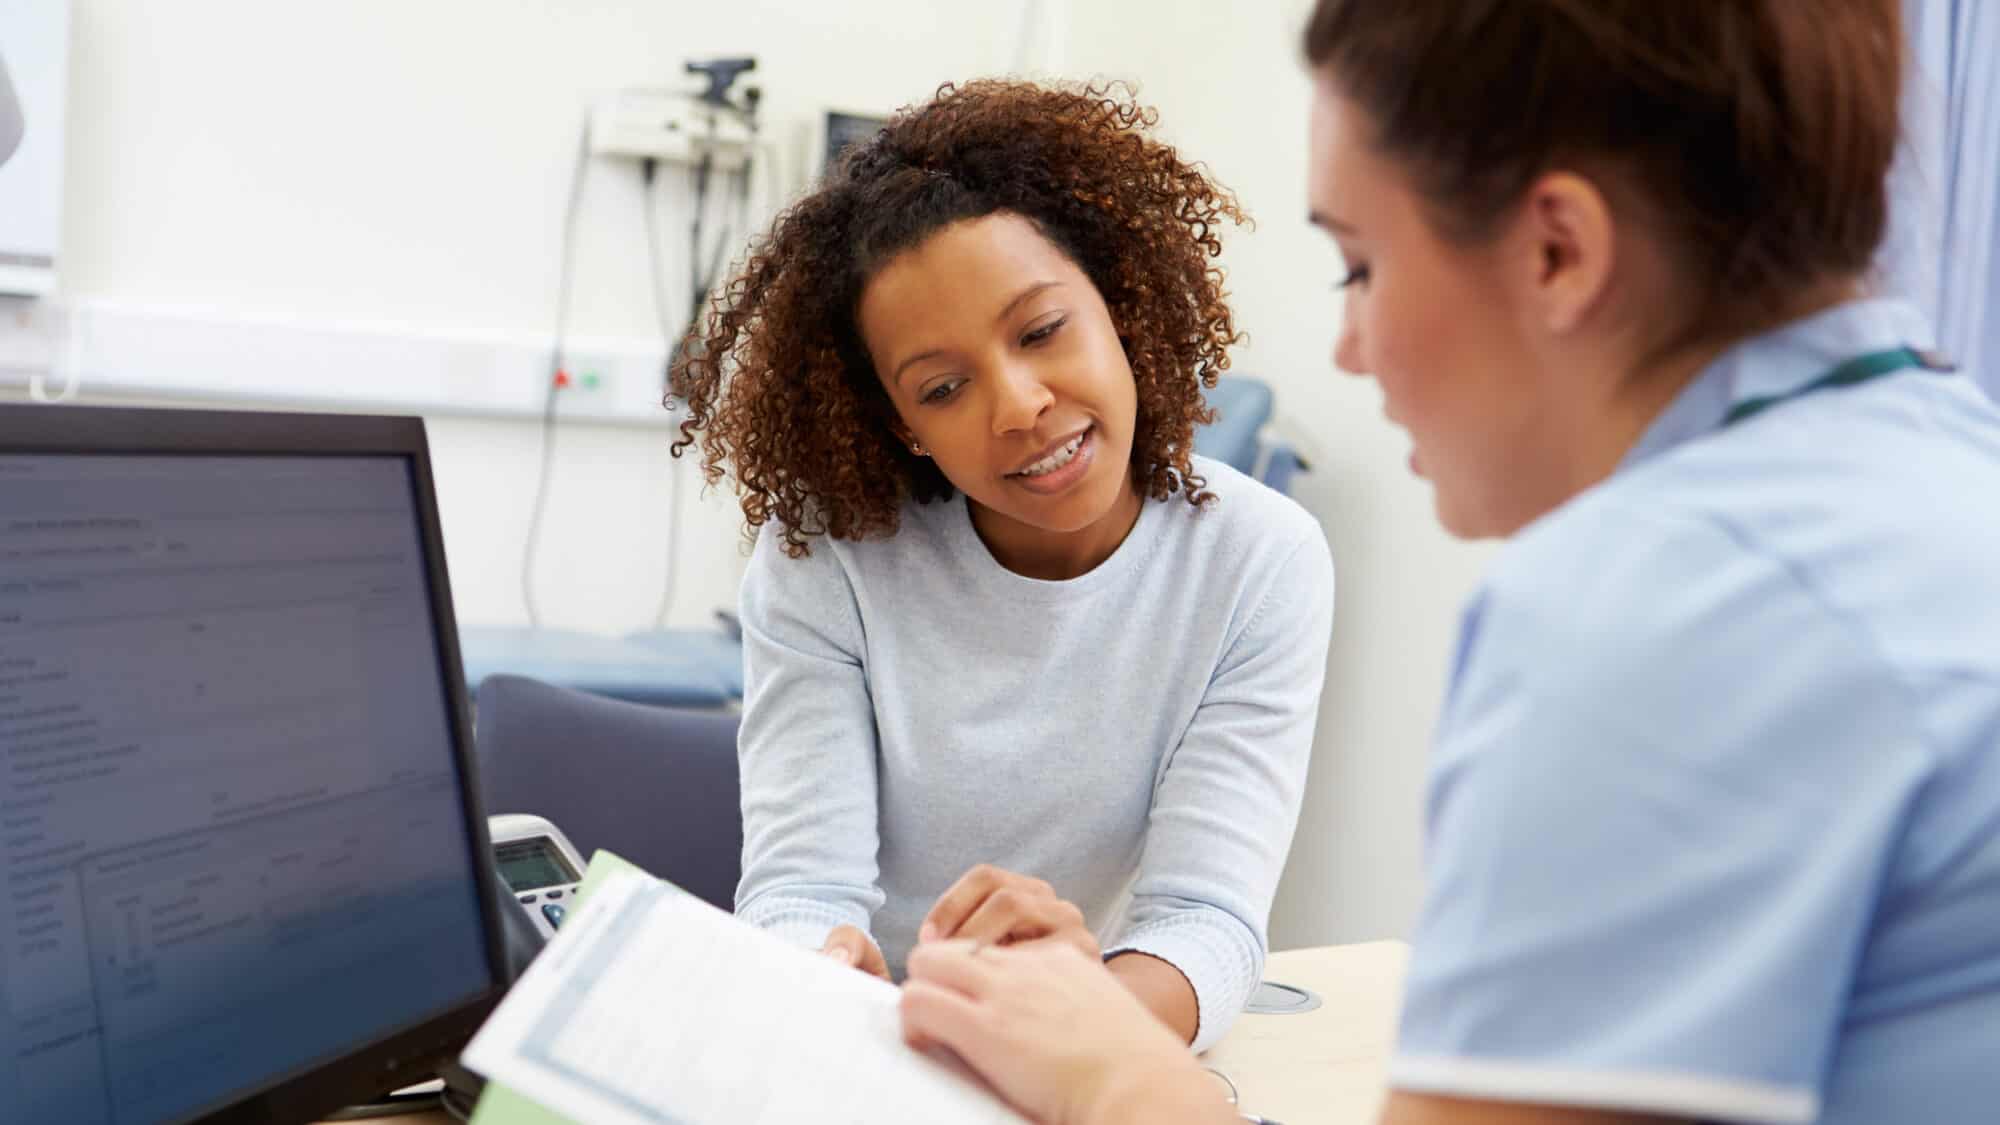 Nurse reviews health history with a patient.